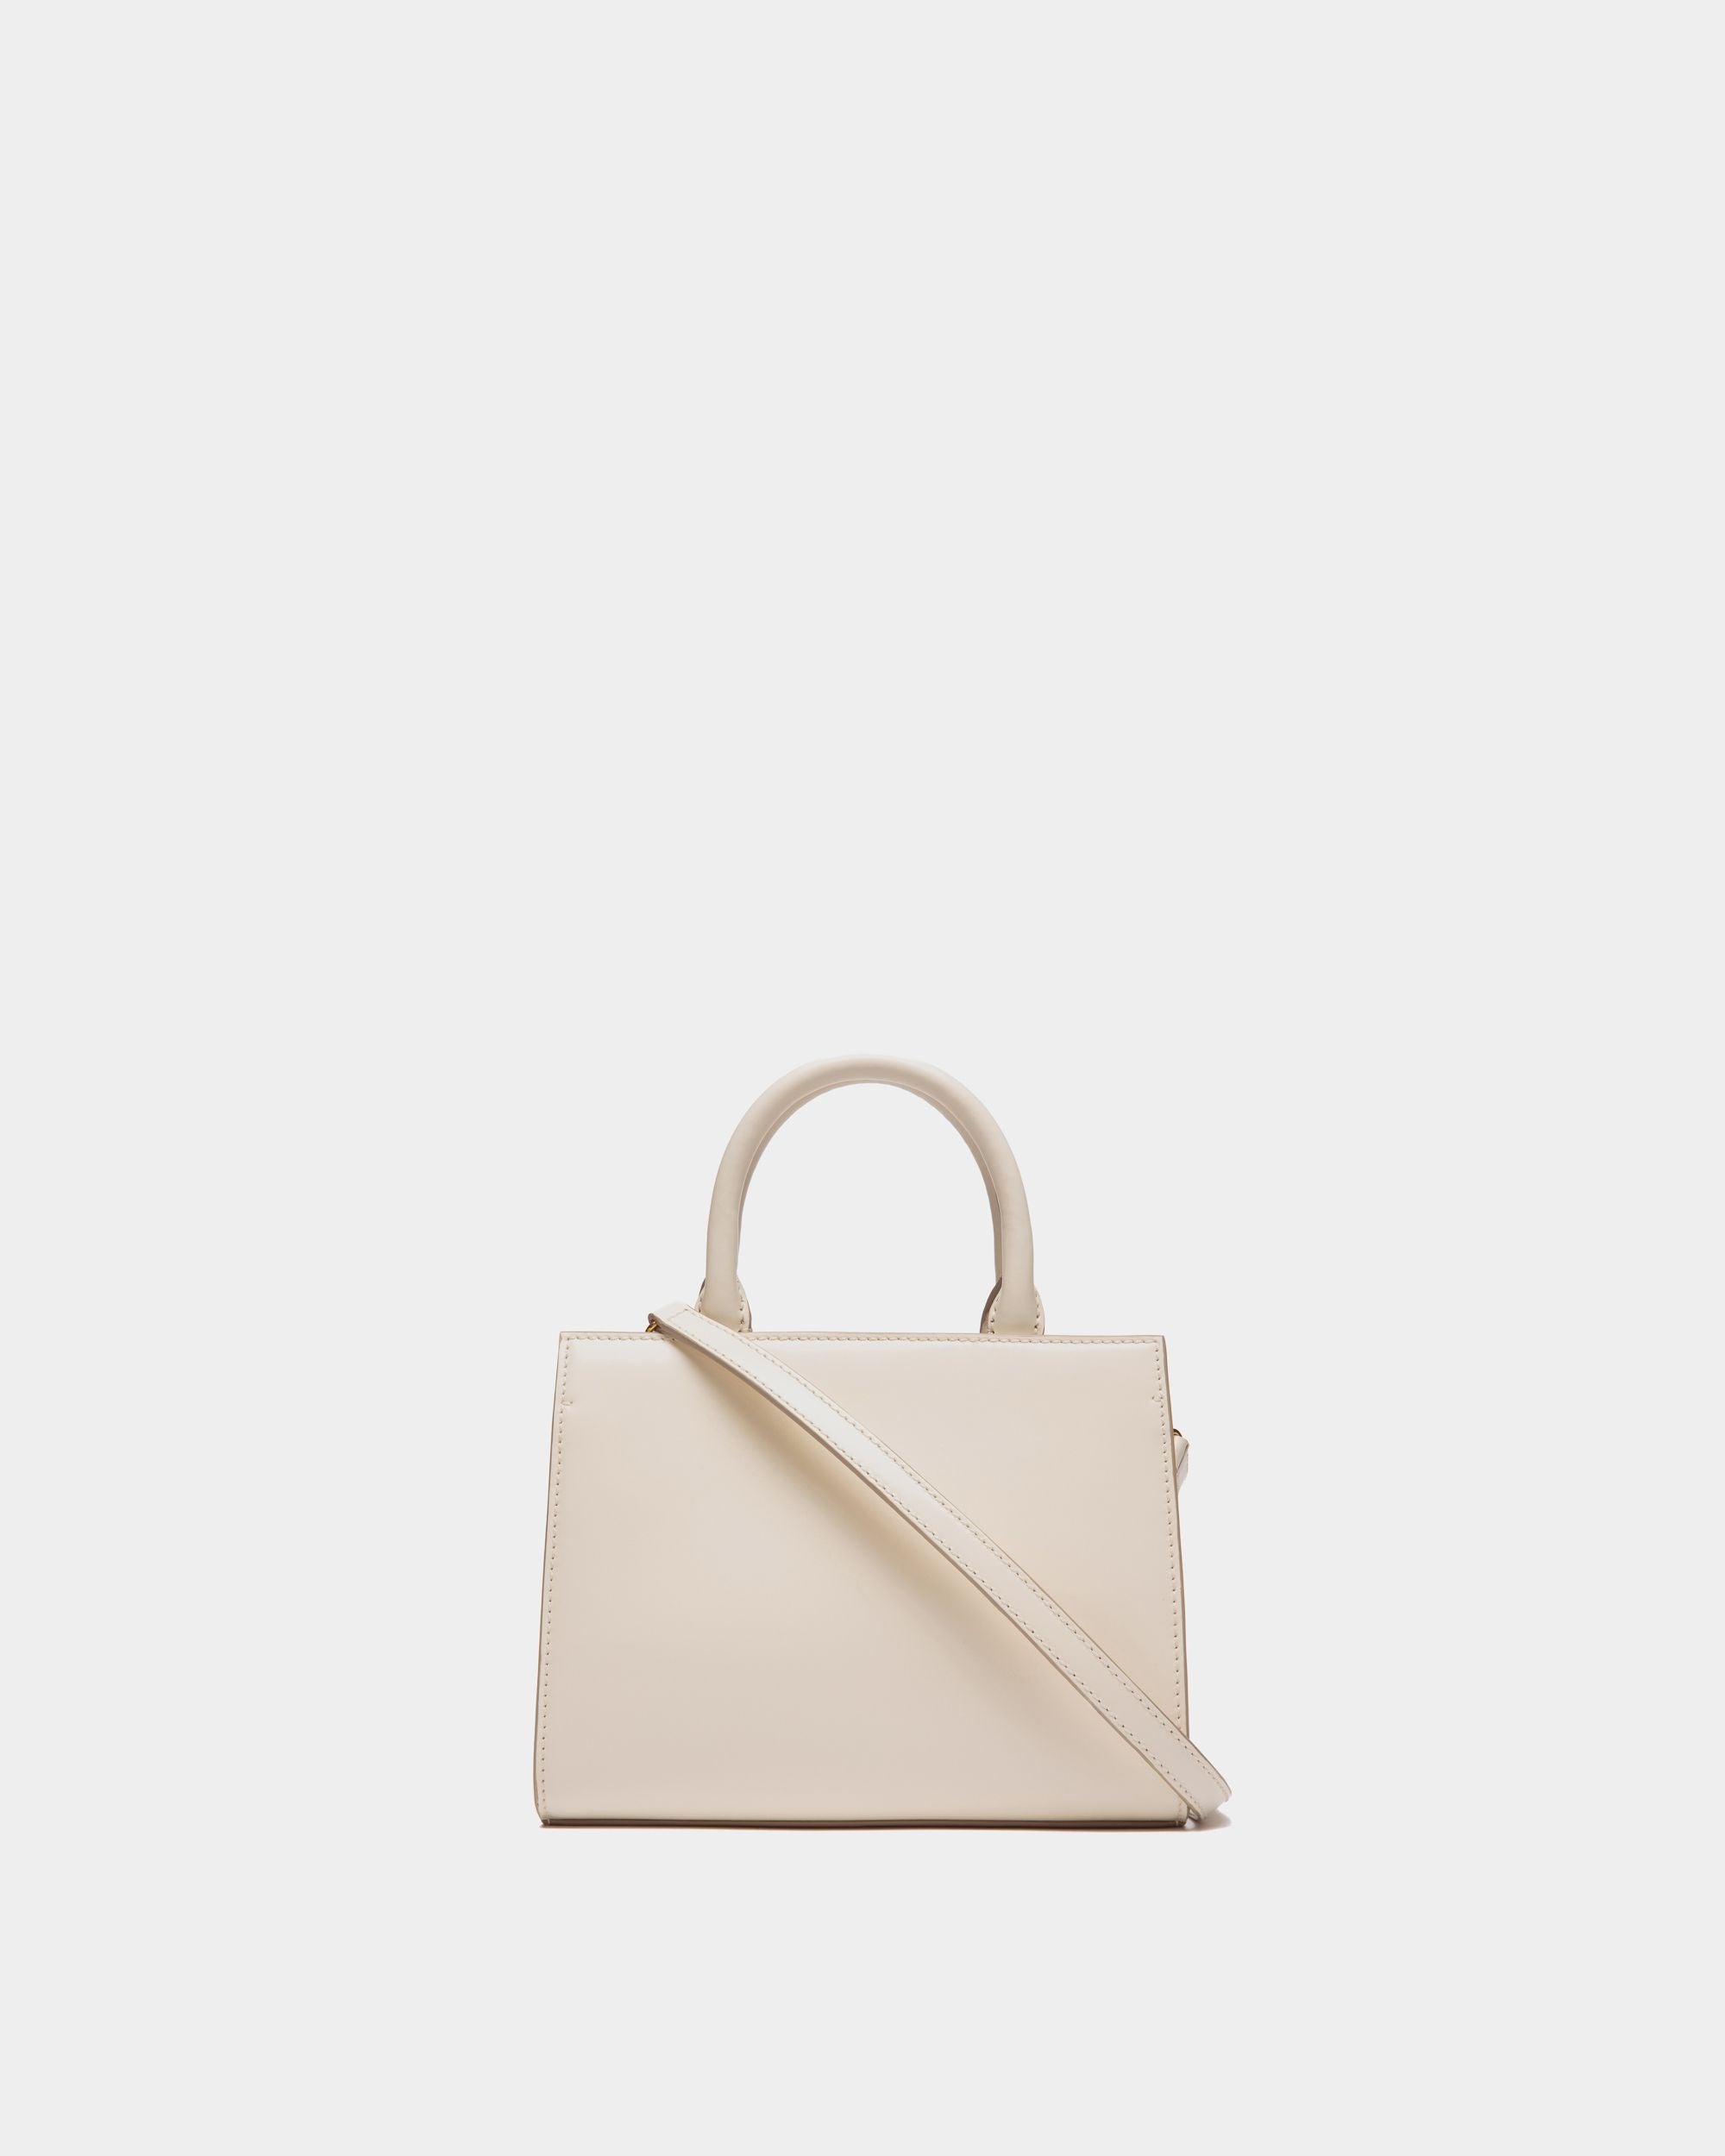 Emblem | Women's Small Tote Bag in White Brushed Leather | Bally | Still Life Back